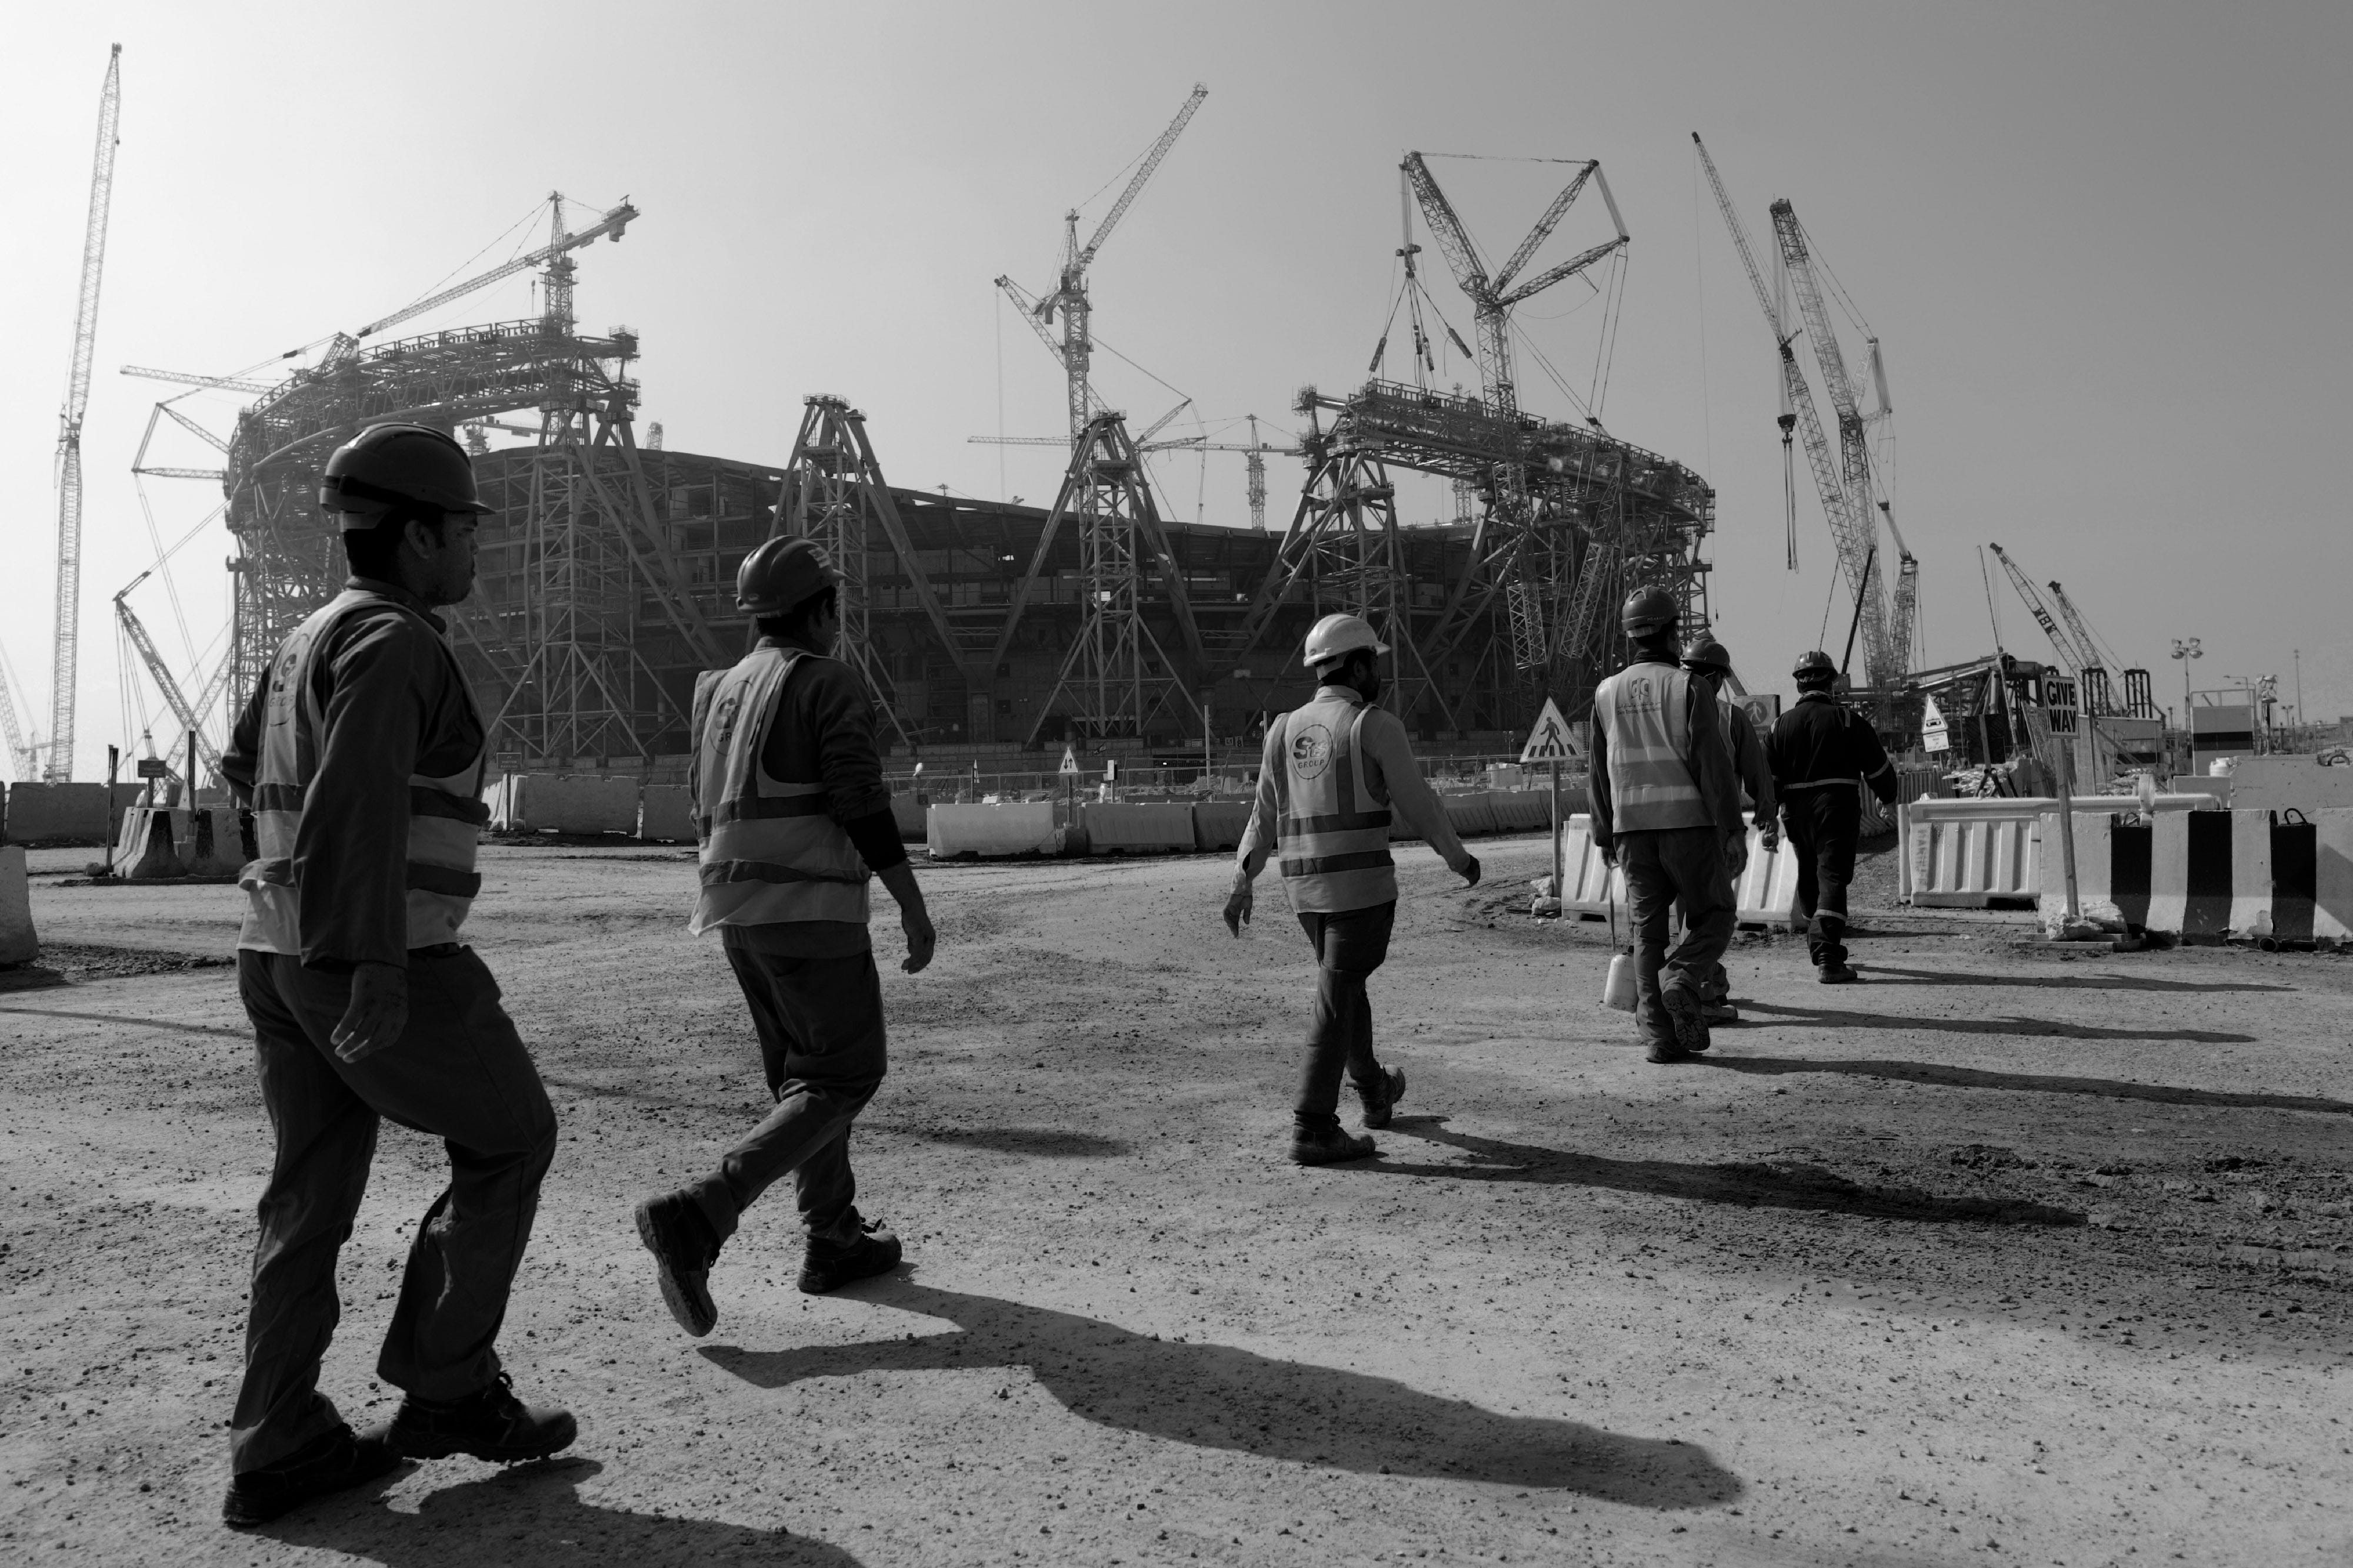 World Cup 2022: Numbers shed light on plight of migrant workers ahead of Qatar  World Cup